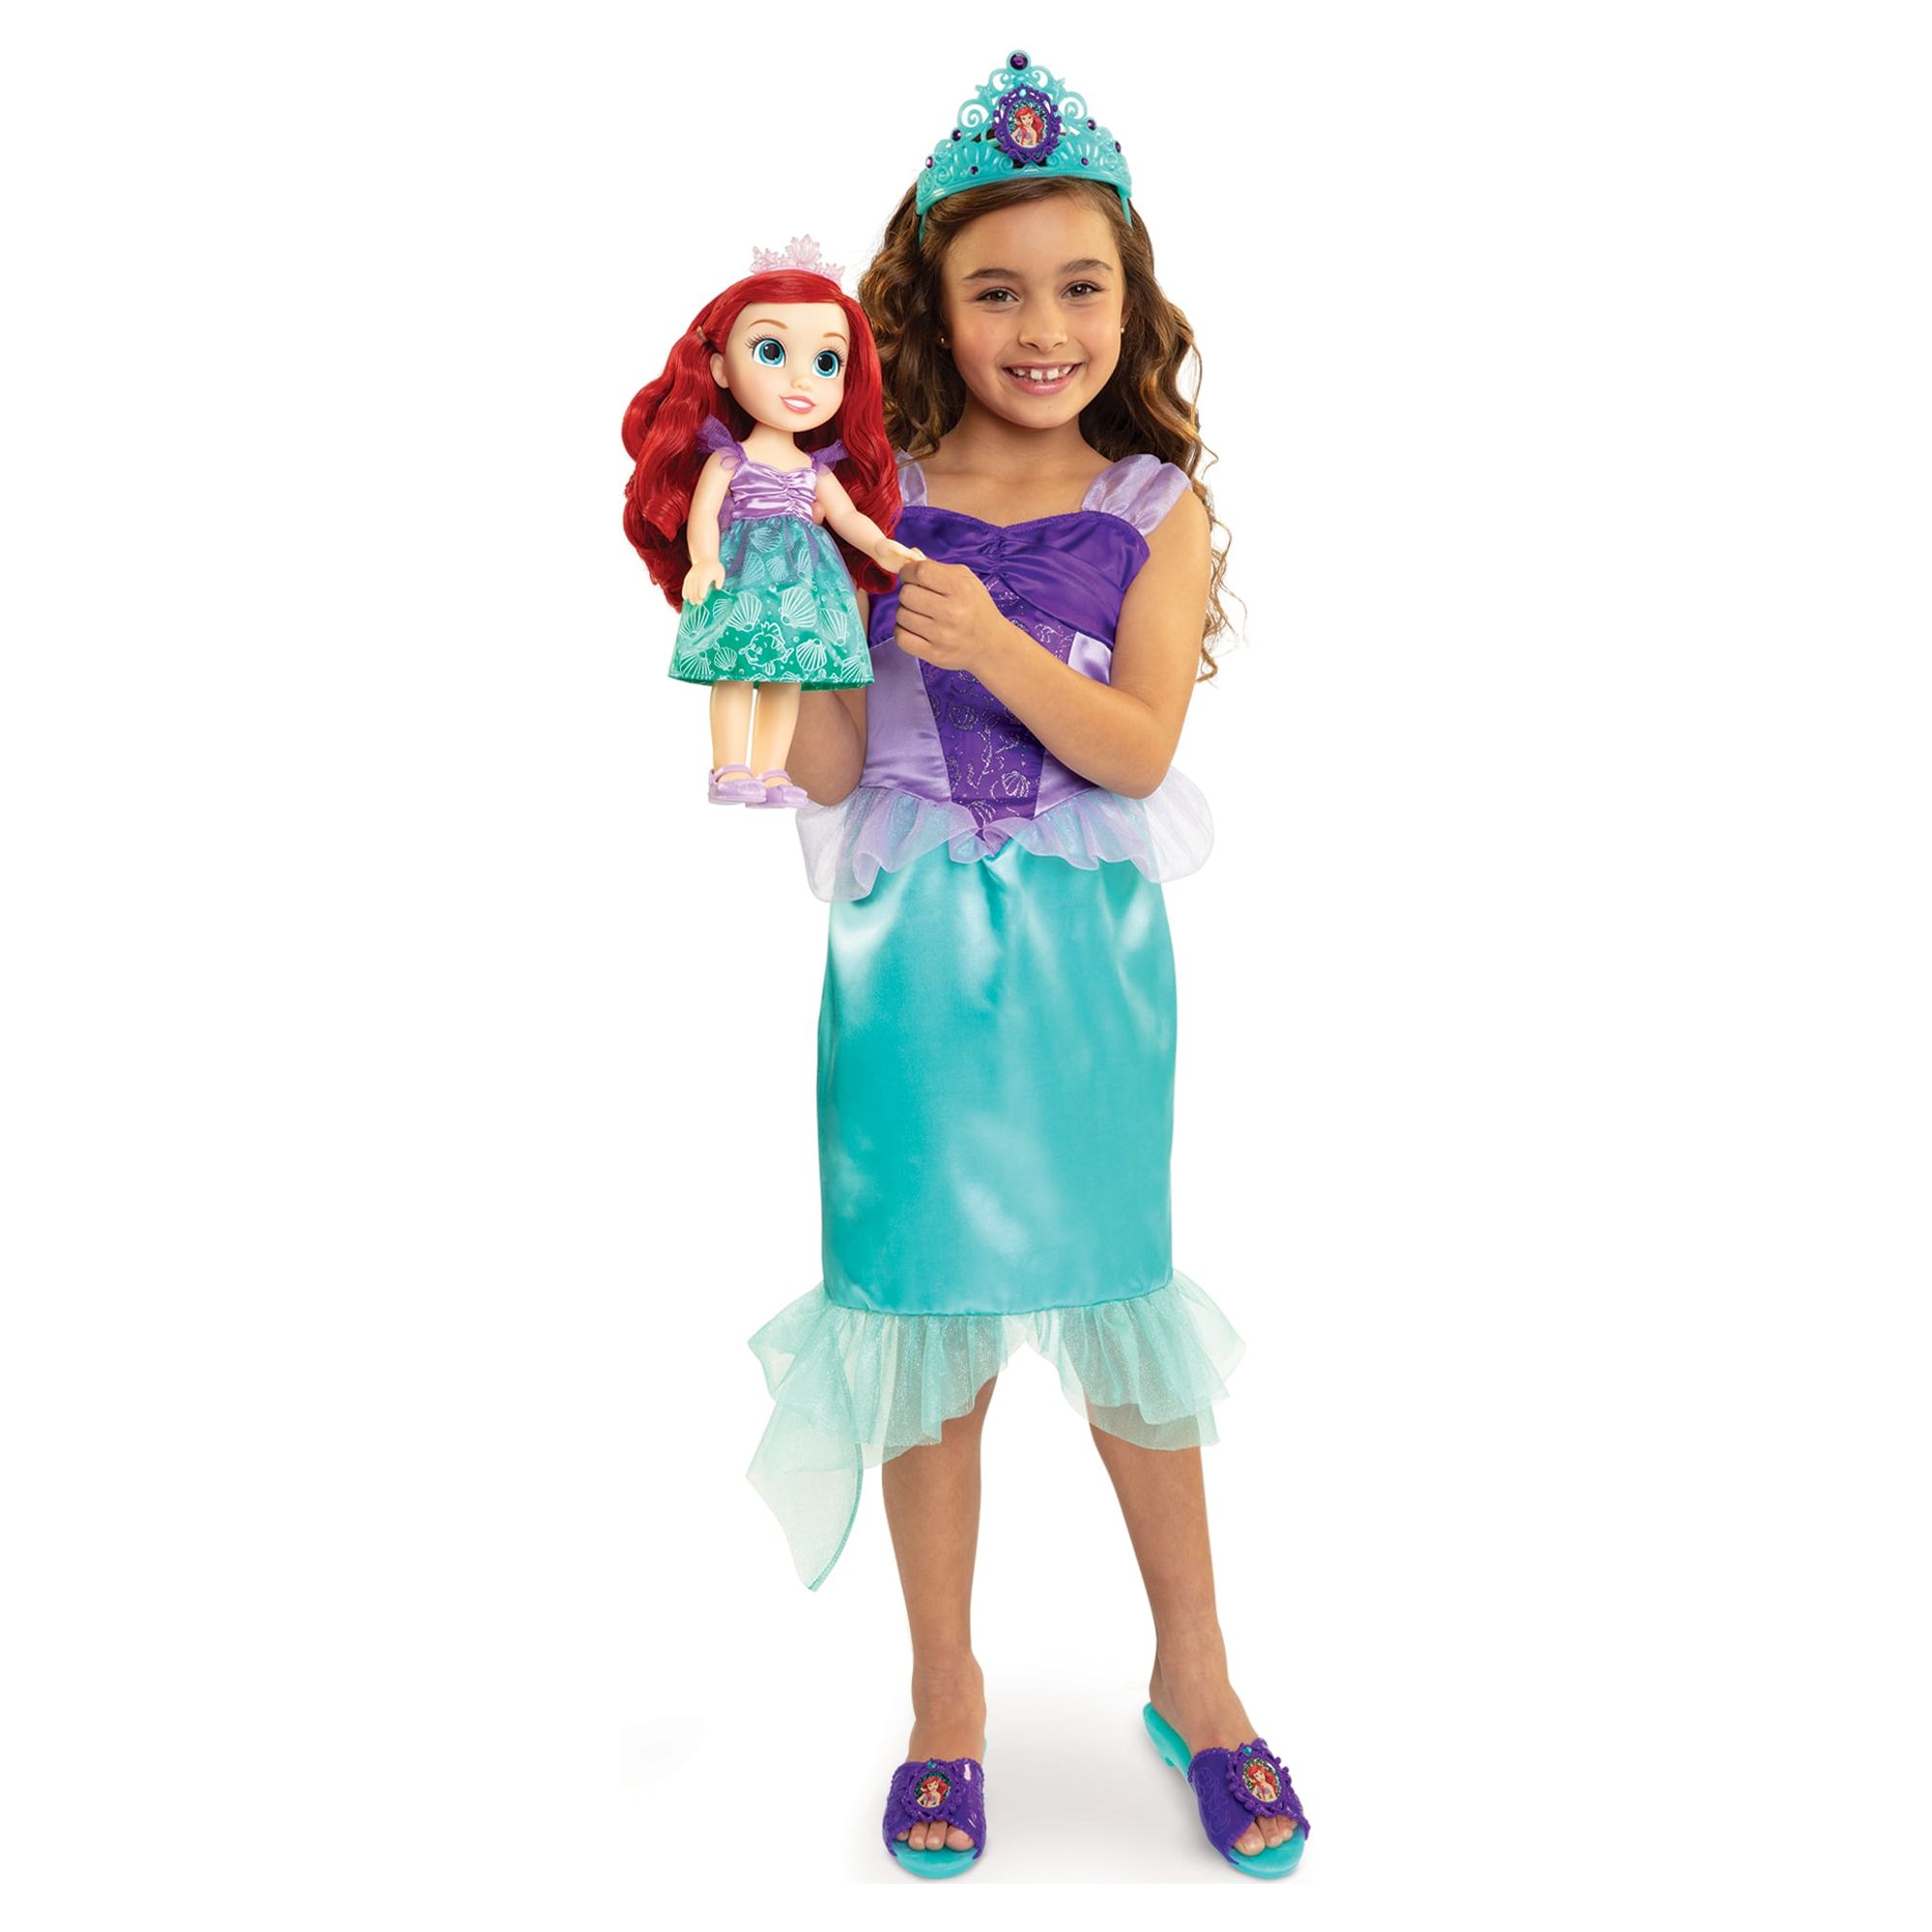 Disney Princess Ariel Toddler Doll with Child Size Dress and Accessories - image 1 of 8